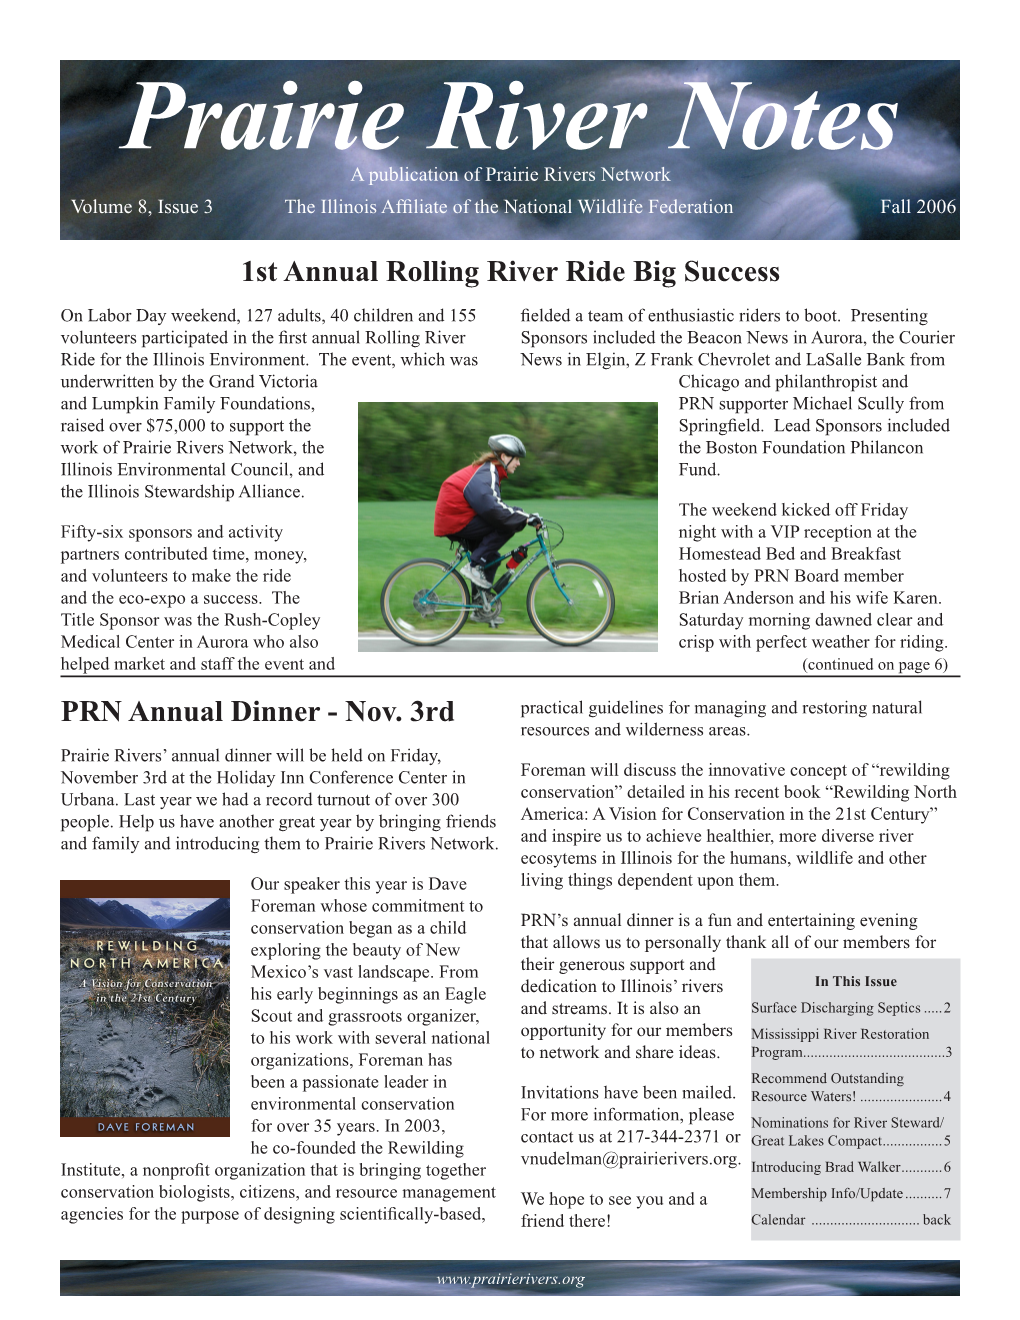 Prairie River Notes a Publication of Prairie Rivers Network Volume 8, Issue 3 the Illinois Affiliate of the National Wildlife Federation Fall 2006